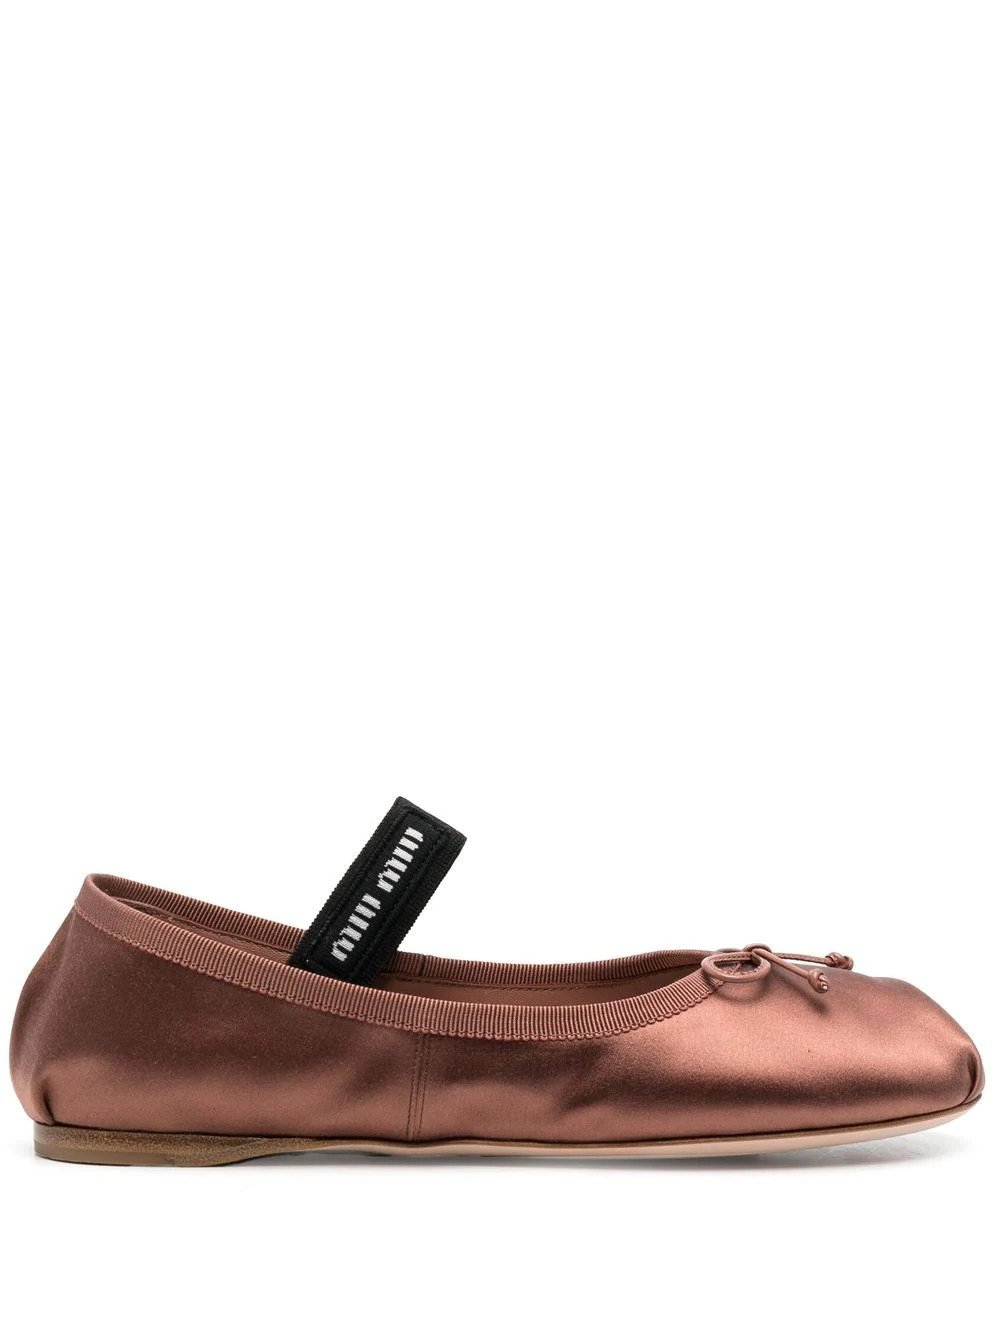 The Miu Miu Ballet Flats on Every It Girl's Wish List | Who What Wear